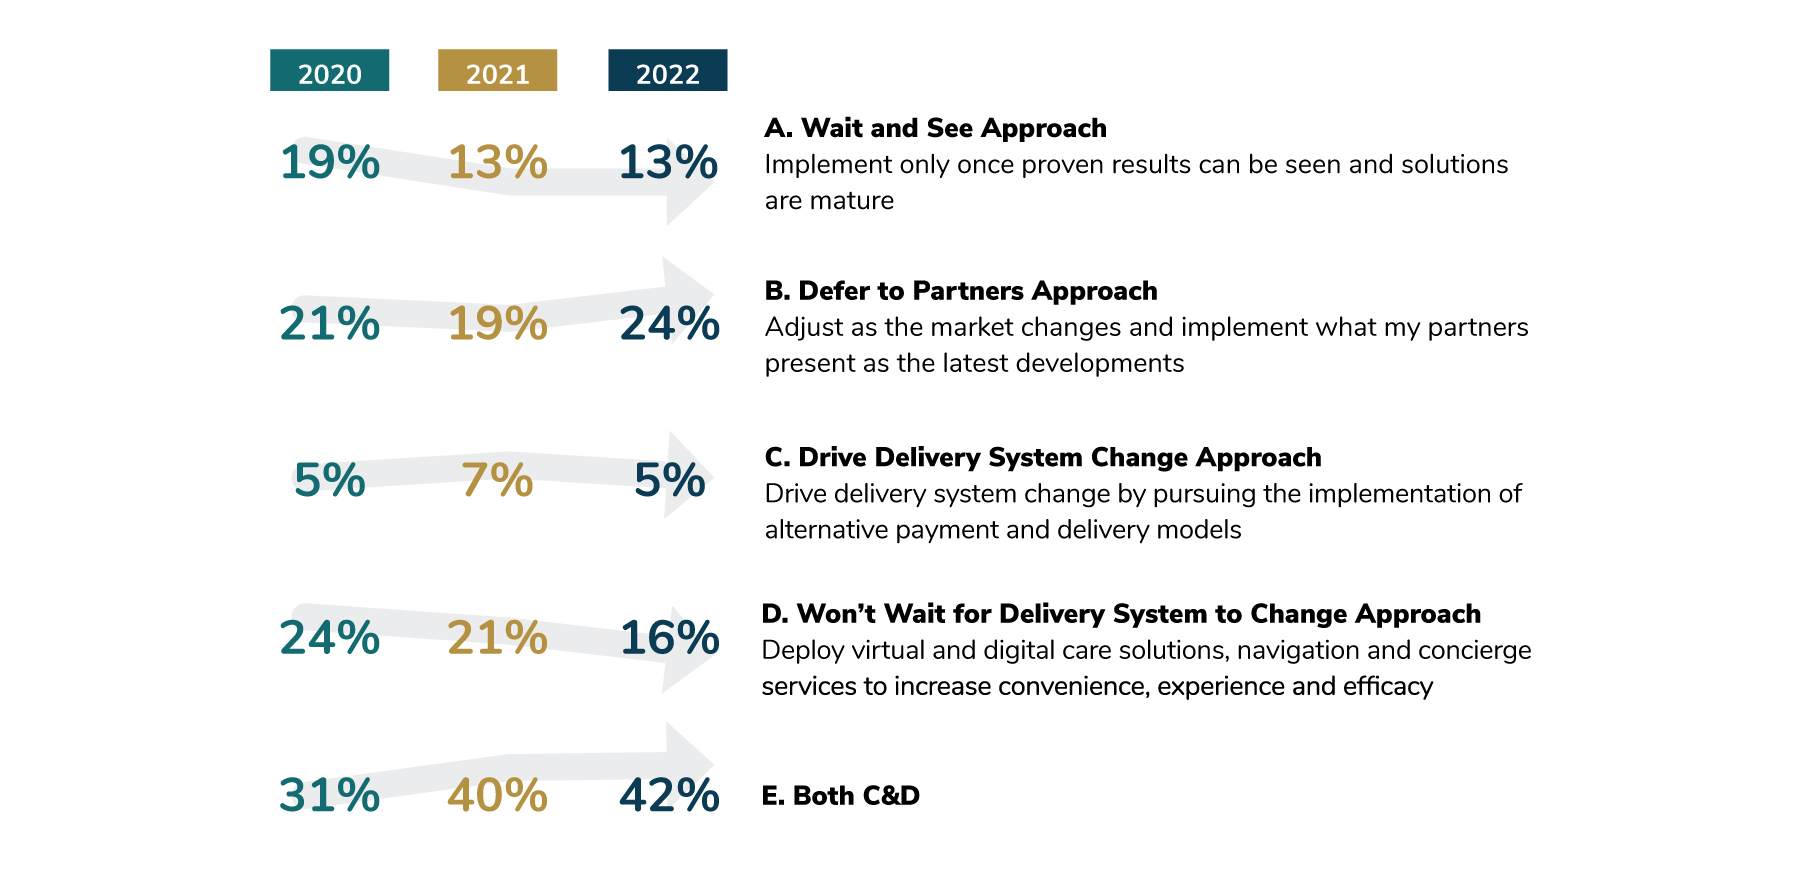 5% of employers drive delivery system change via alternative delivery models, 16% primarily implement virtual solutions to drive change, 42% do both, 24% defer to their partners, and 13% take a wait and see approach.